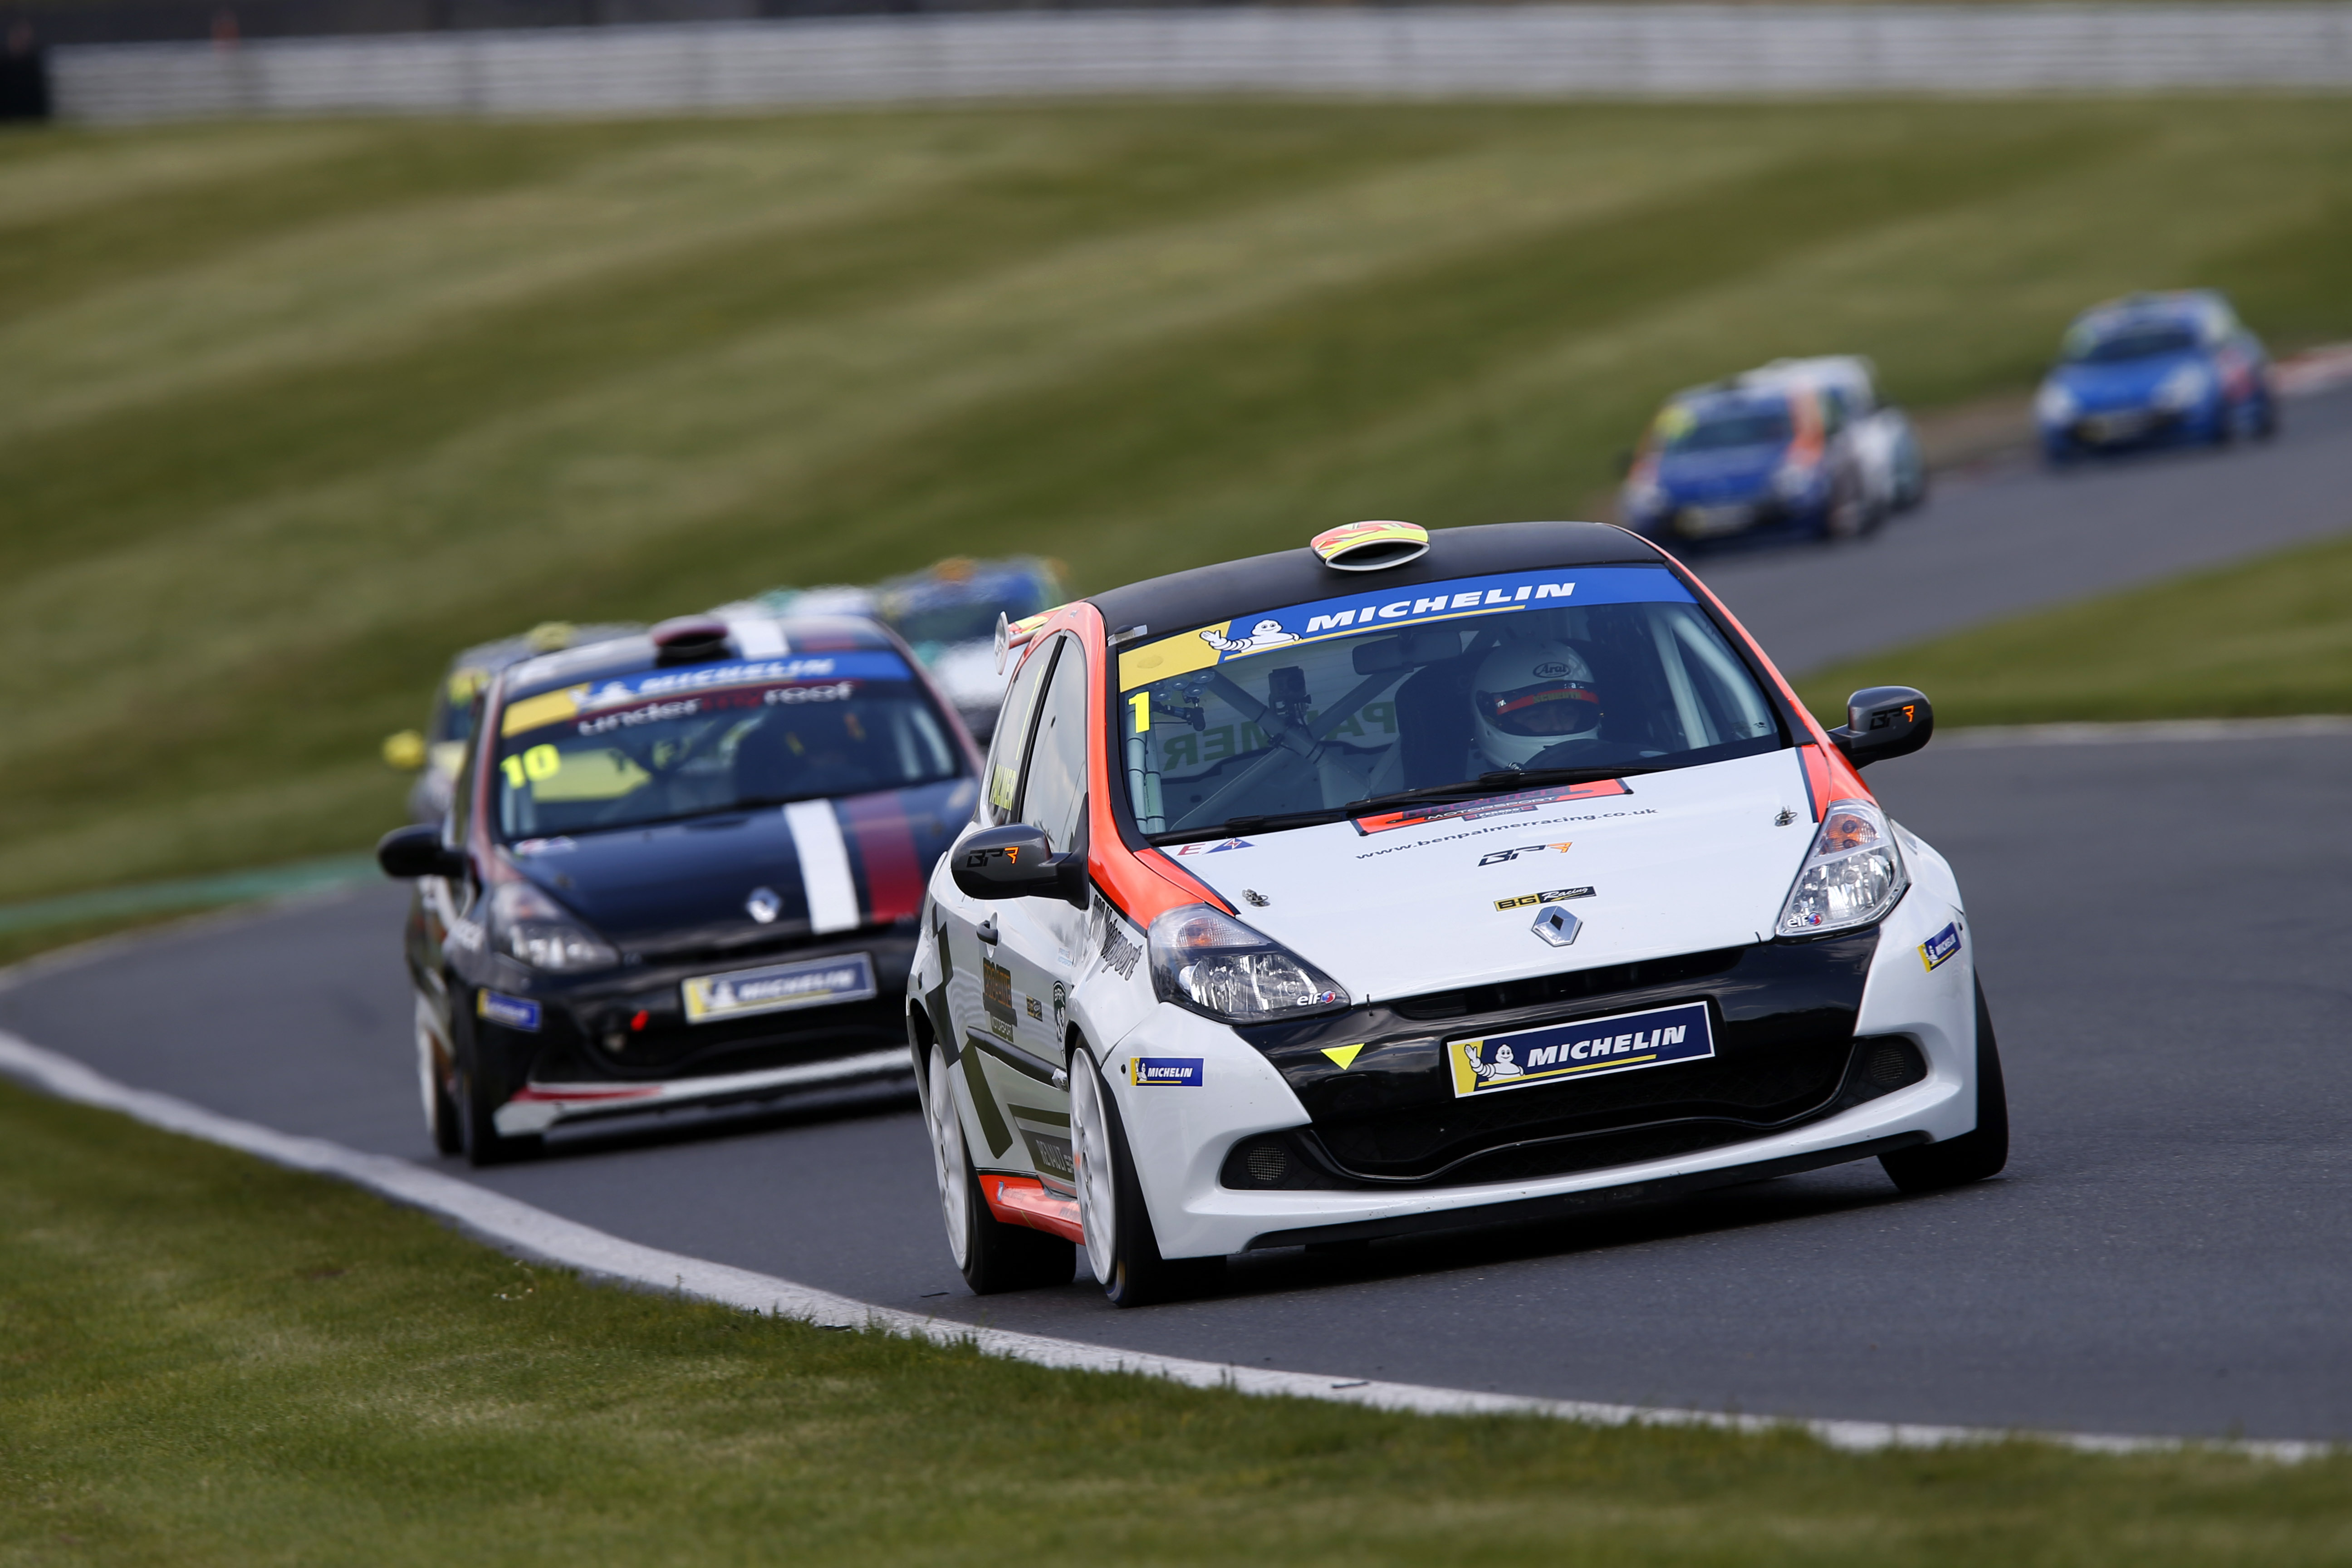 MICHELIN CLIO CUP SERIES PROVIDES ANOTHER WEEKEND OF EXCELLENT RACING